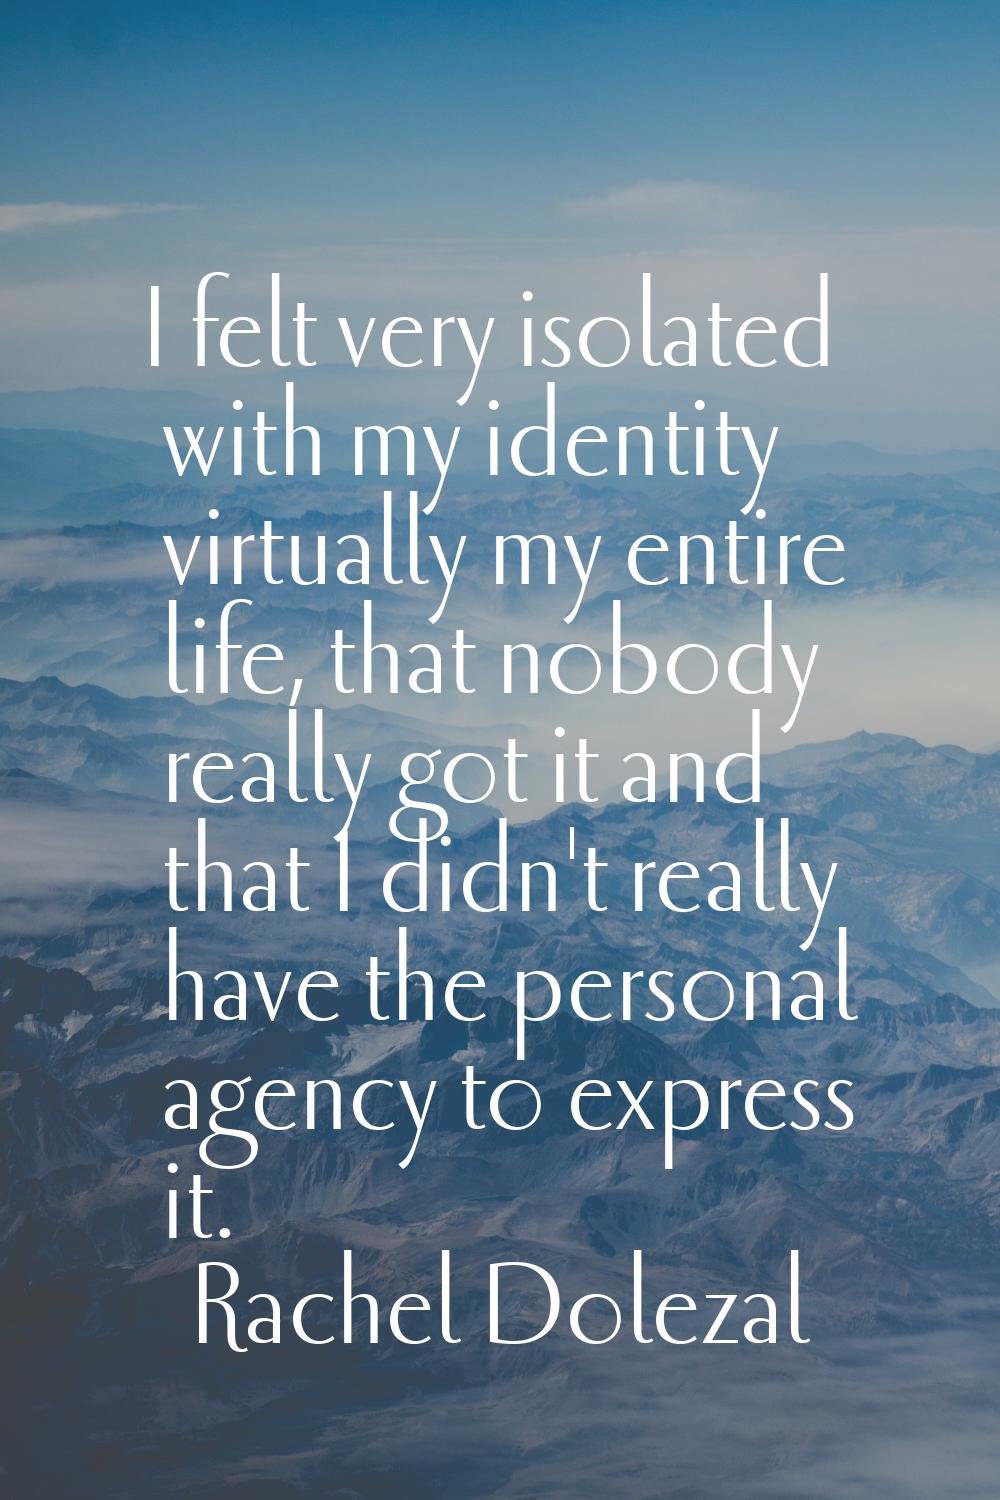 I felt very isolated with my identity virtually my entire life, that nobody really got it and that 